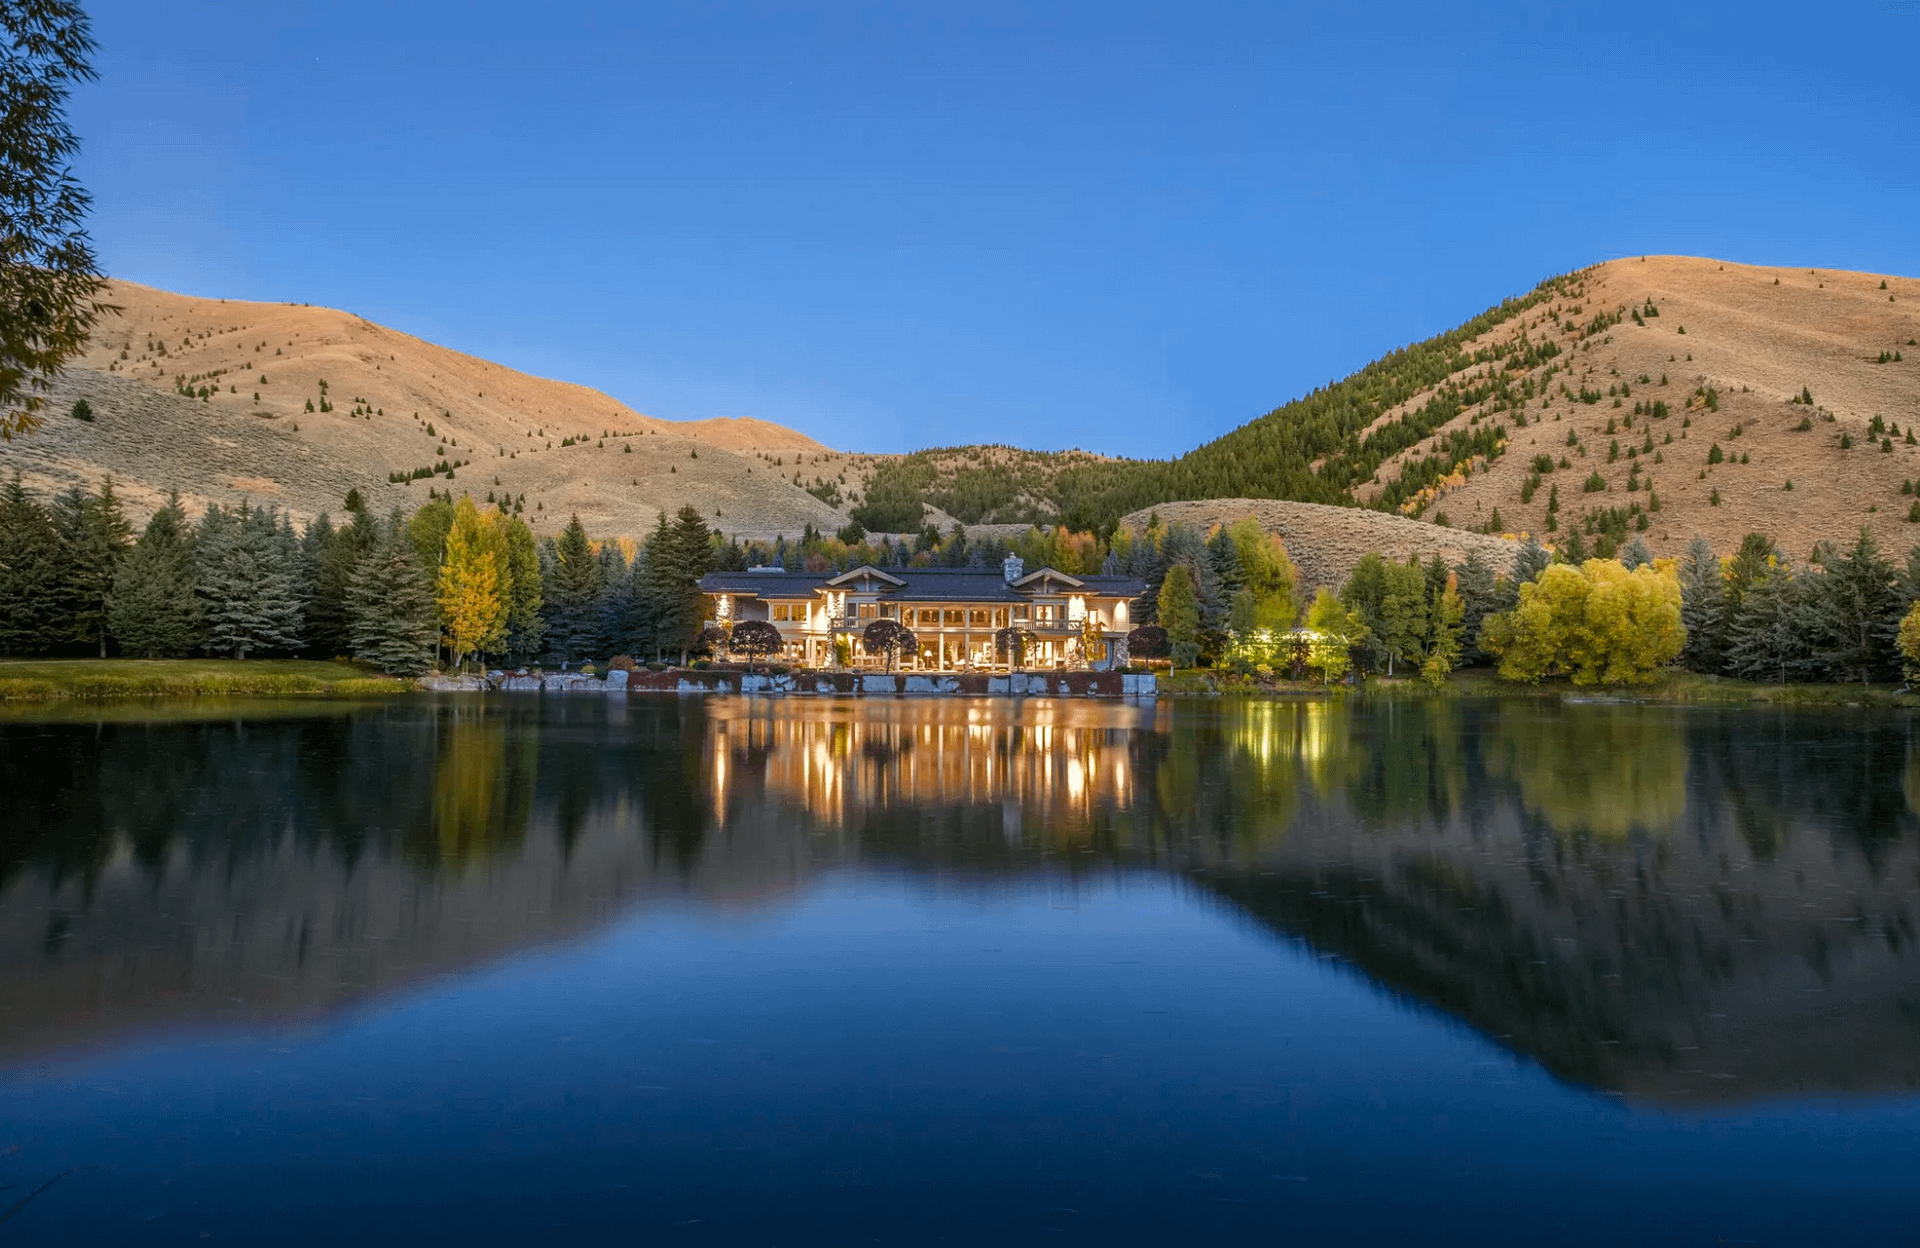 Idaho Home On 276 Acres With Private Lake (PHOTOS)